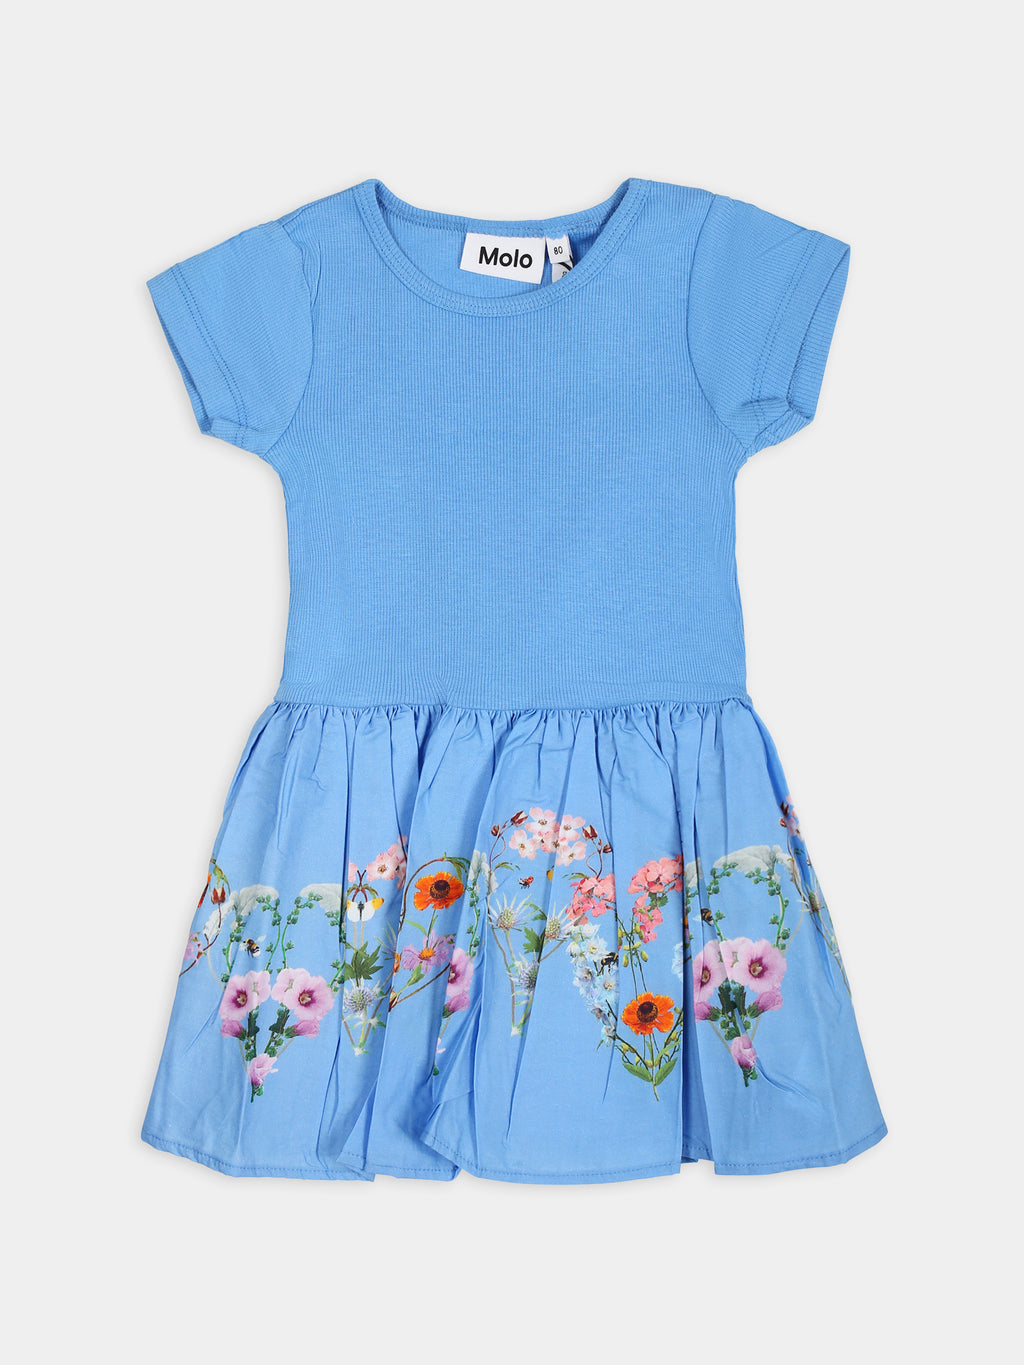 Light blue casual Carin dress for baby girl  with a floral pattern